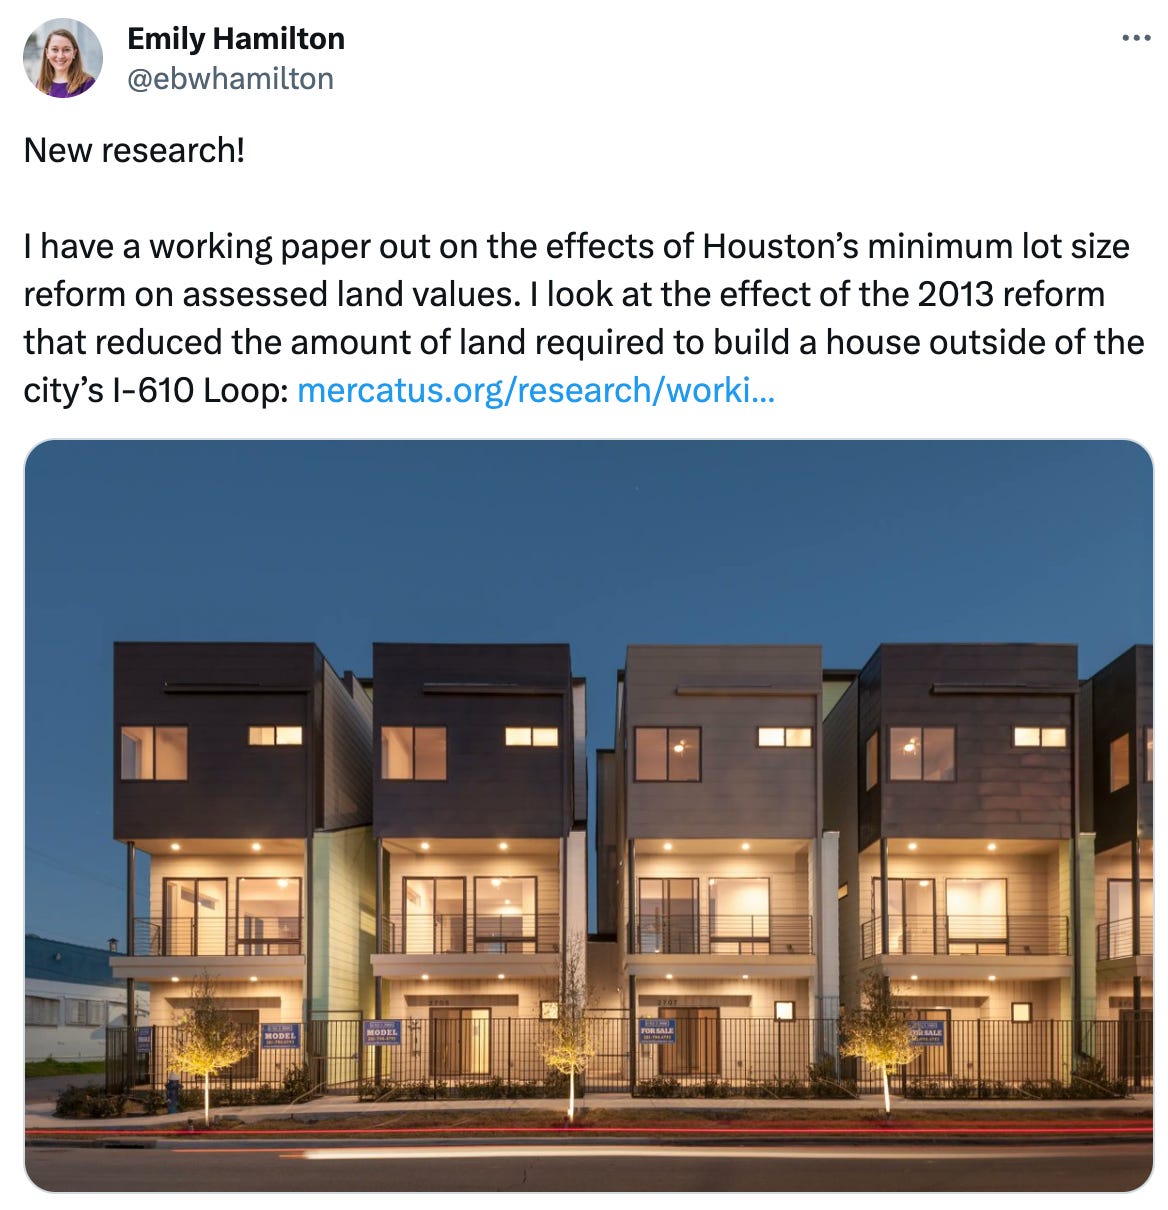  Emily Hamilton @ebwhamilton New research!  I have a working paper out on the effects of Houston’s minimum lot size reform on assessed land values. I look at the effect of the 2013 reform that reduced the amount of land required to build a house outside of the city’s I-610 Loop: https://mercatus.org/research/working-papers/effects-minimum-lot-size-reform-houston-land-values